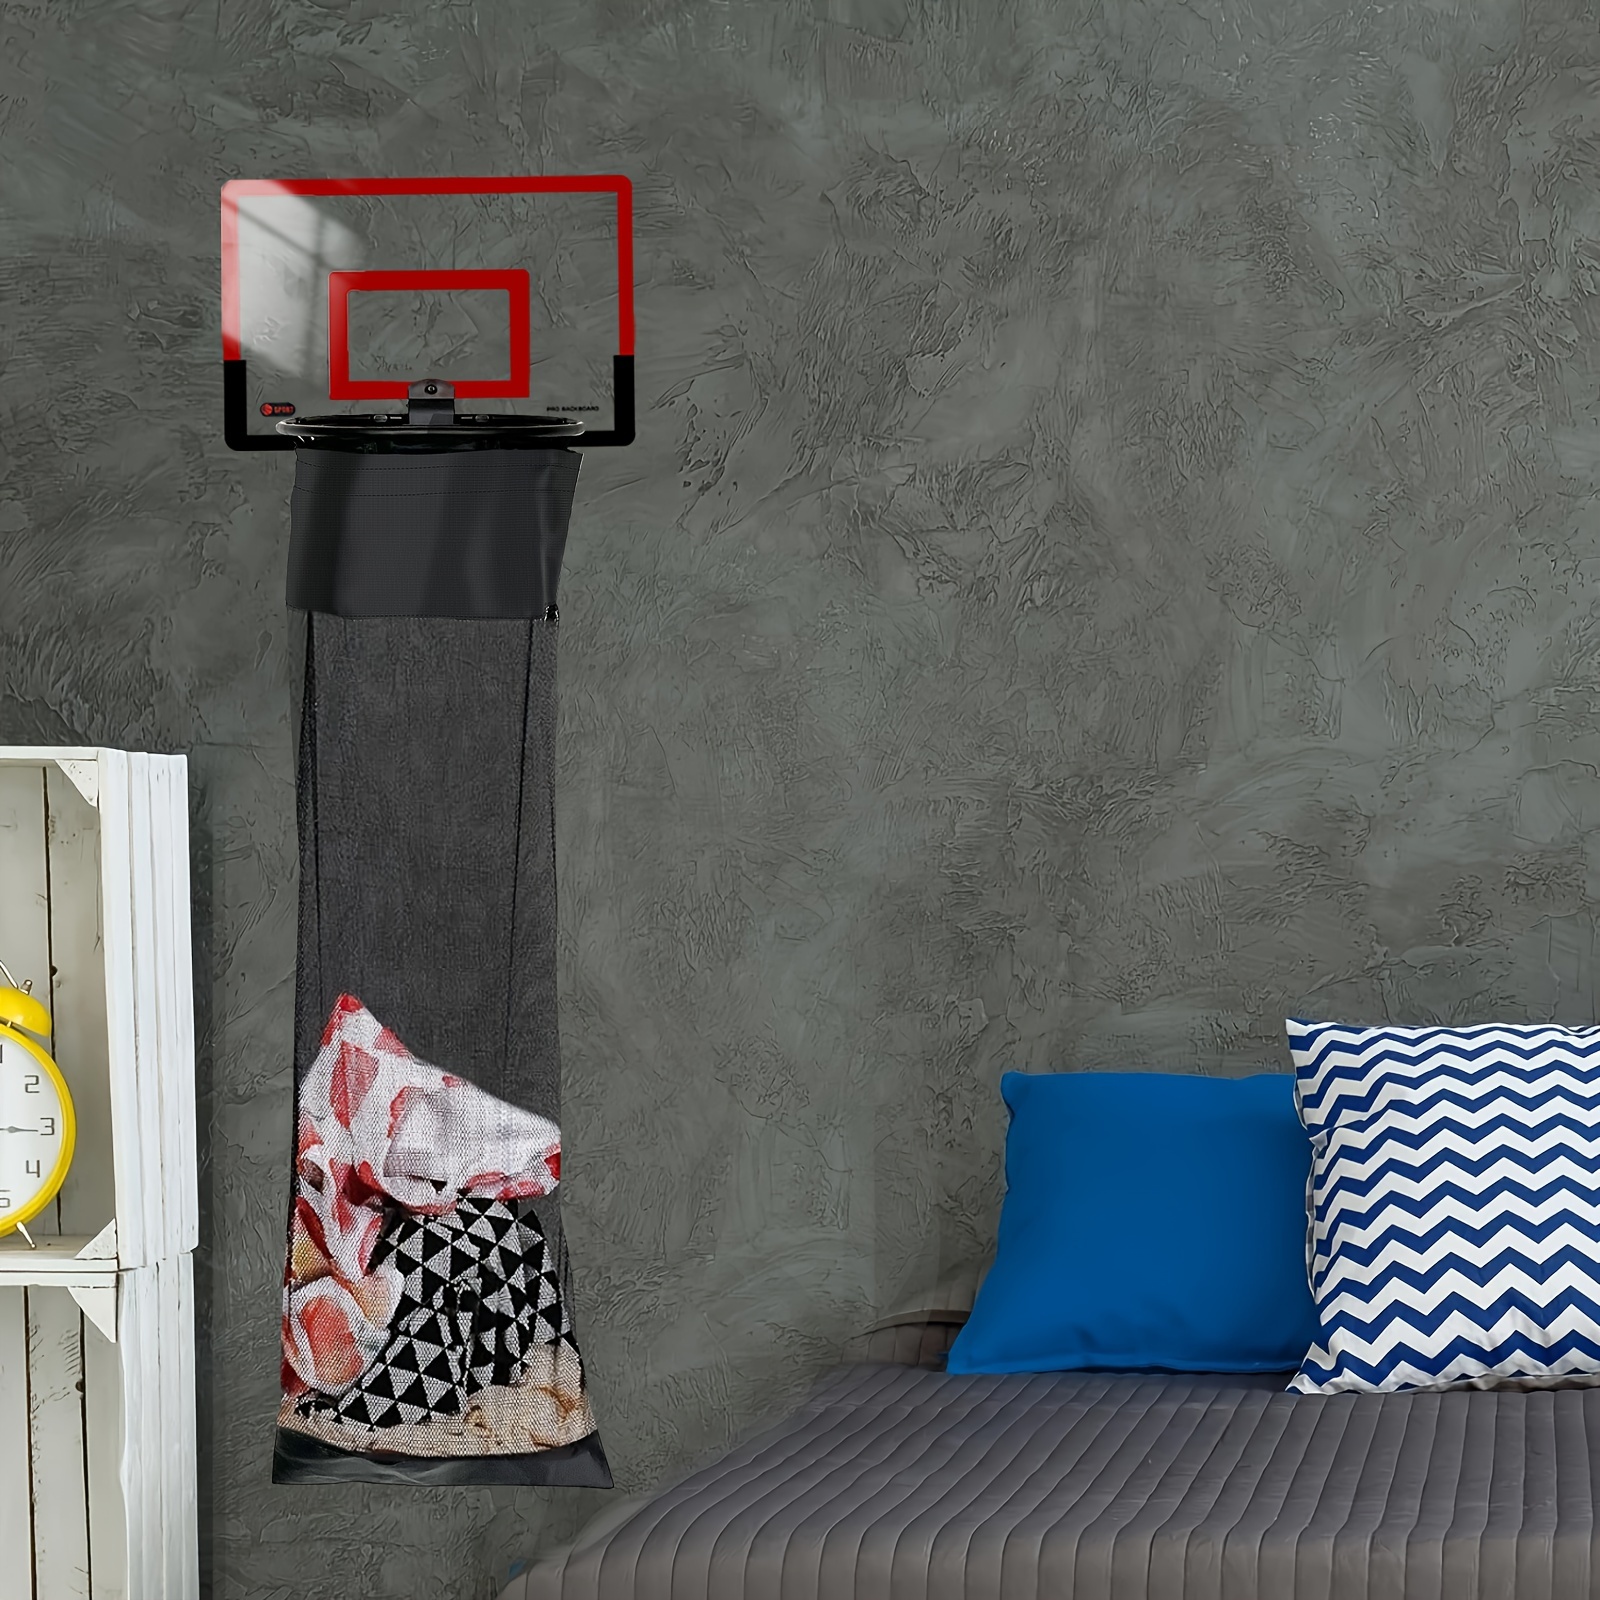 

1pc Basketball Laundry Hamper Hanging Laundry Hamper Over The Door Basketball Laundry Basket, Laundry Fun Laundry Basketball Hoop With Hooks For Boy Girls Bedroom Dorm Clothes